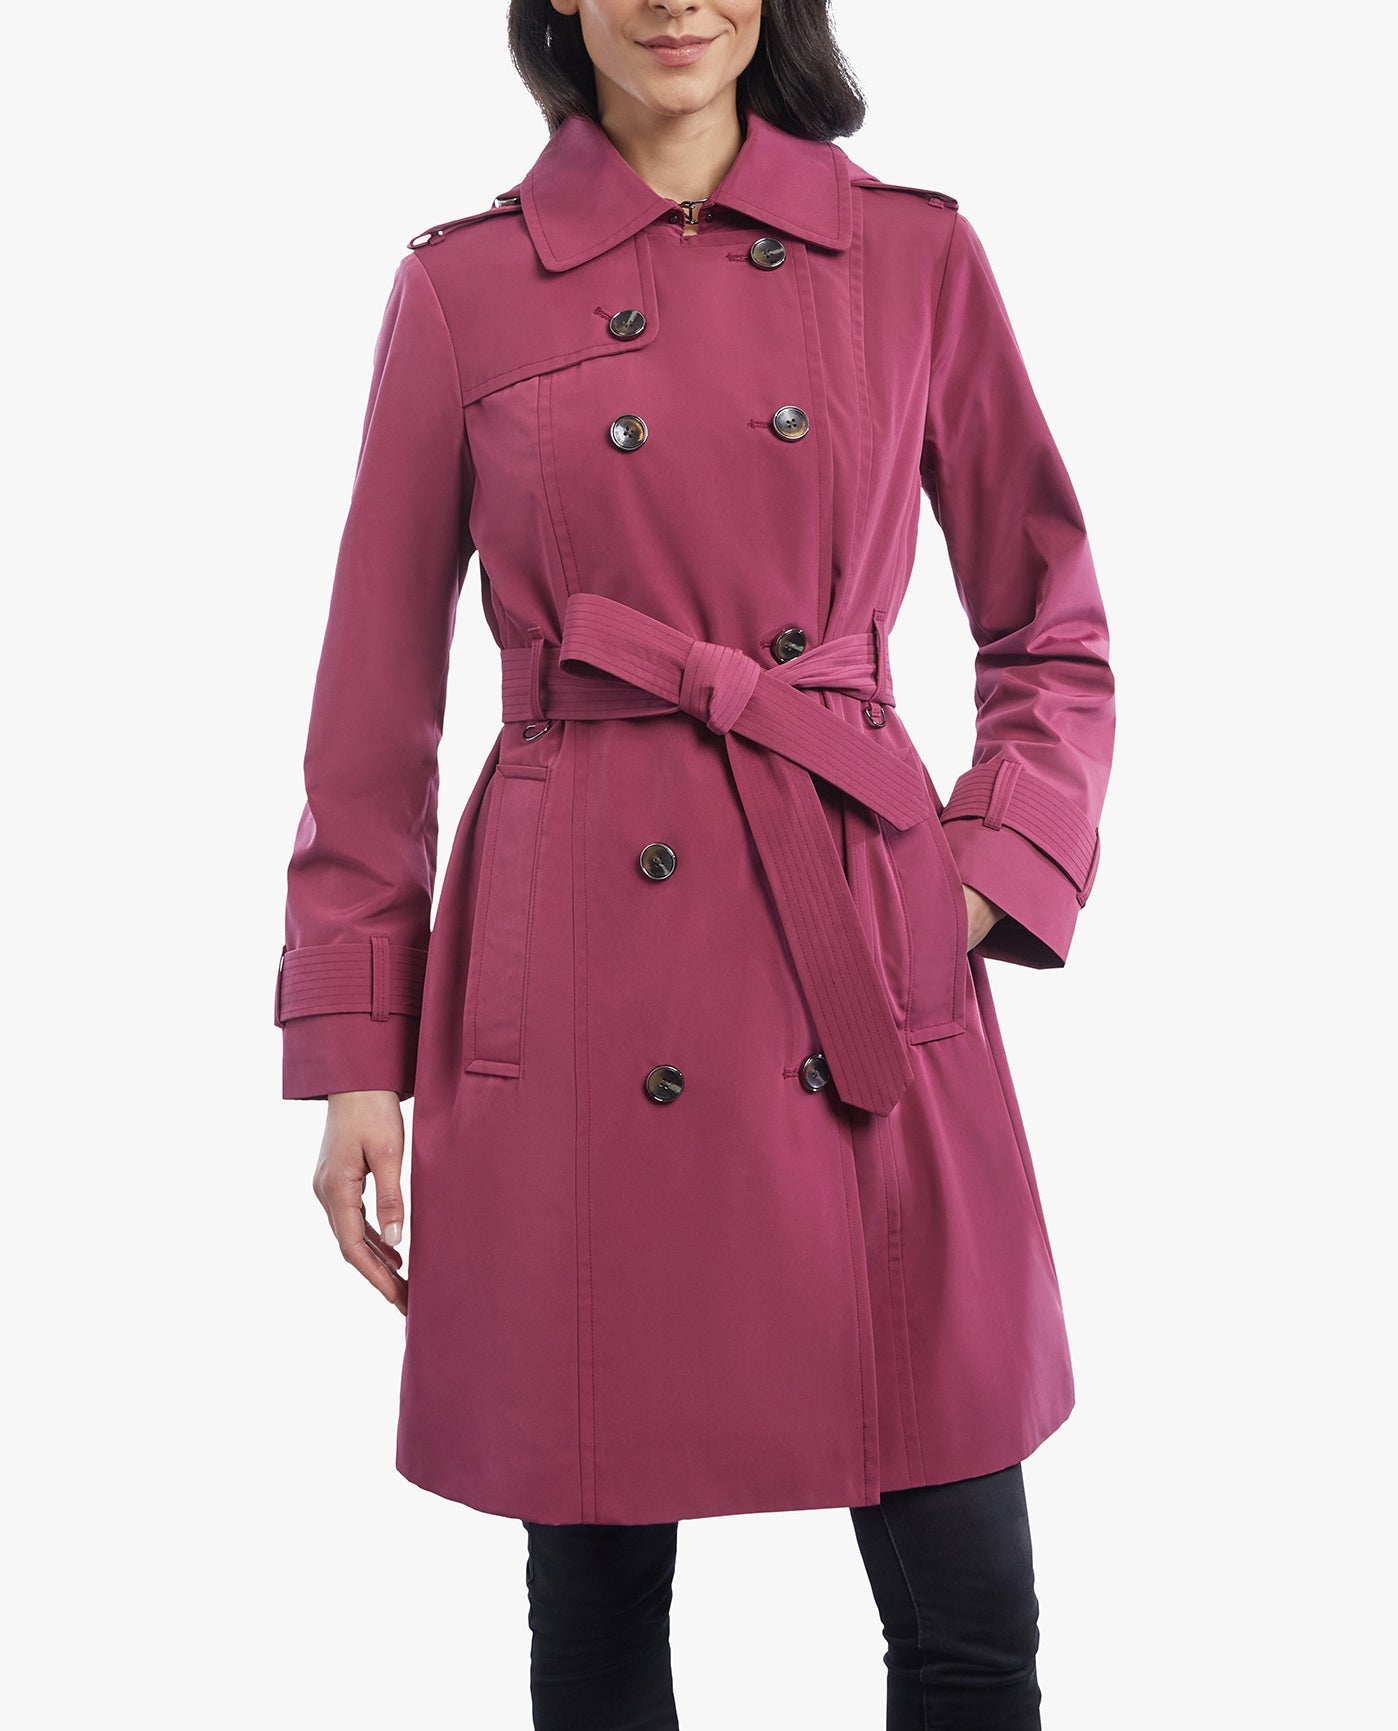 FRONT OF DOUBLE BREASTED BUTTON FRONT TRENCH WITH BELT | RHUBARB